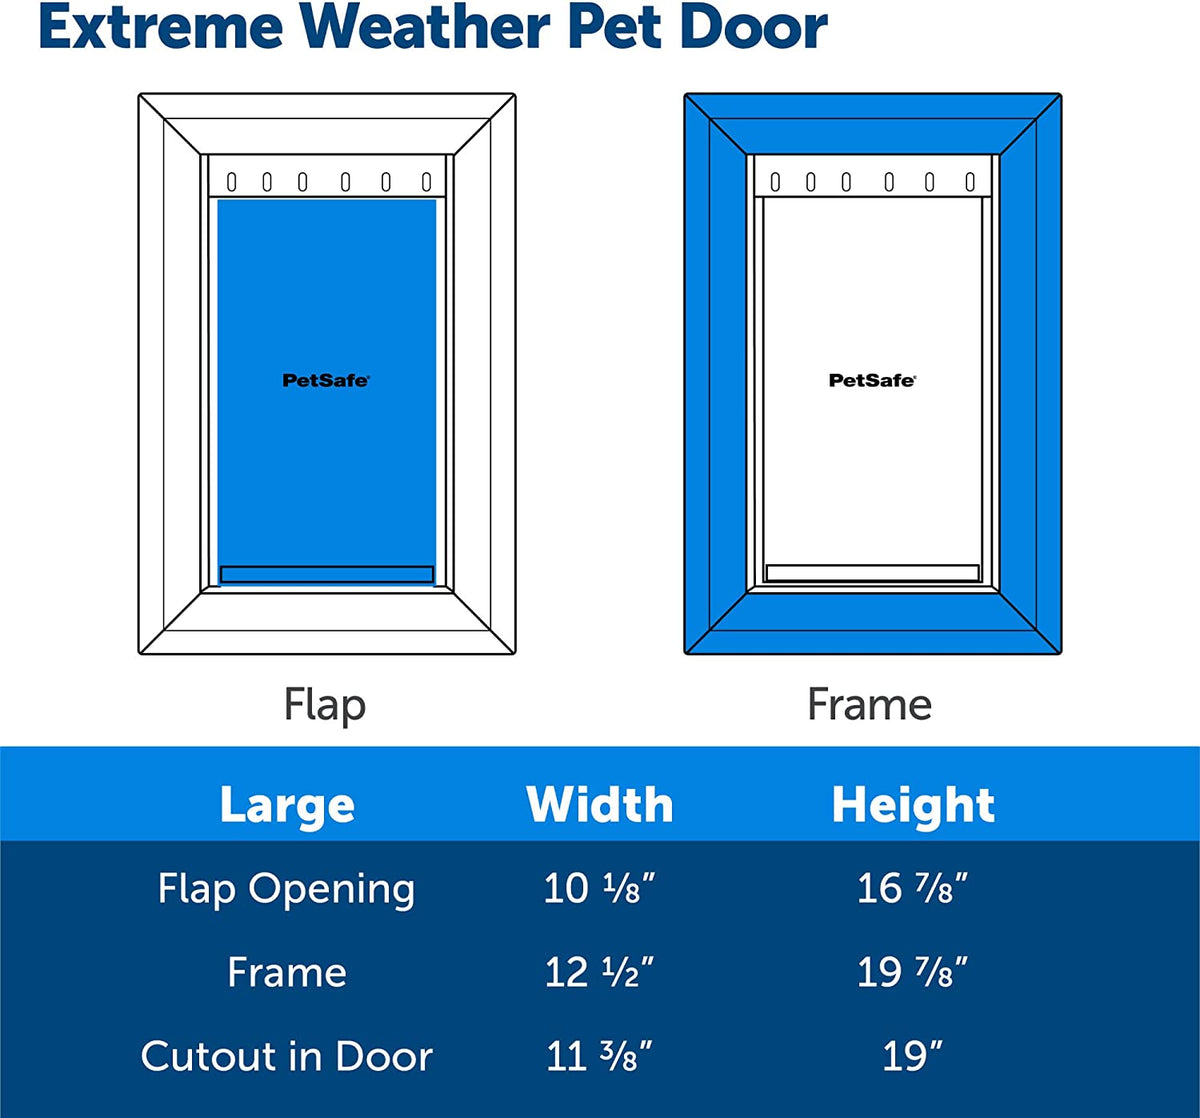 PetSafe Extreme Weather Energy Efficient Pet Door, Unique Three Flap System, White, for Large Dogs Up to 45 kg